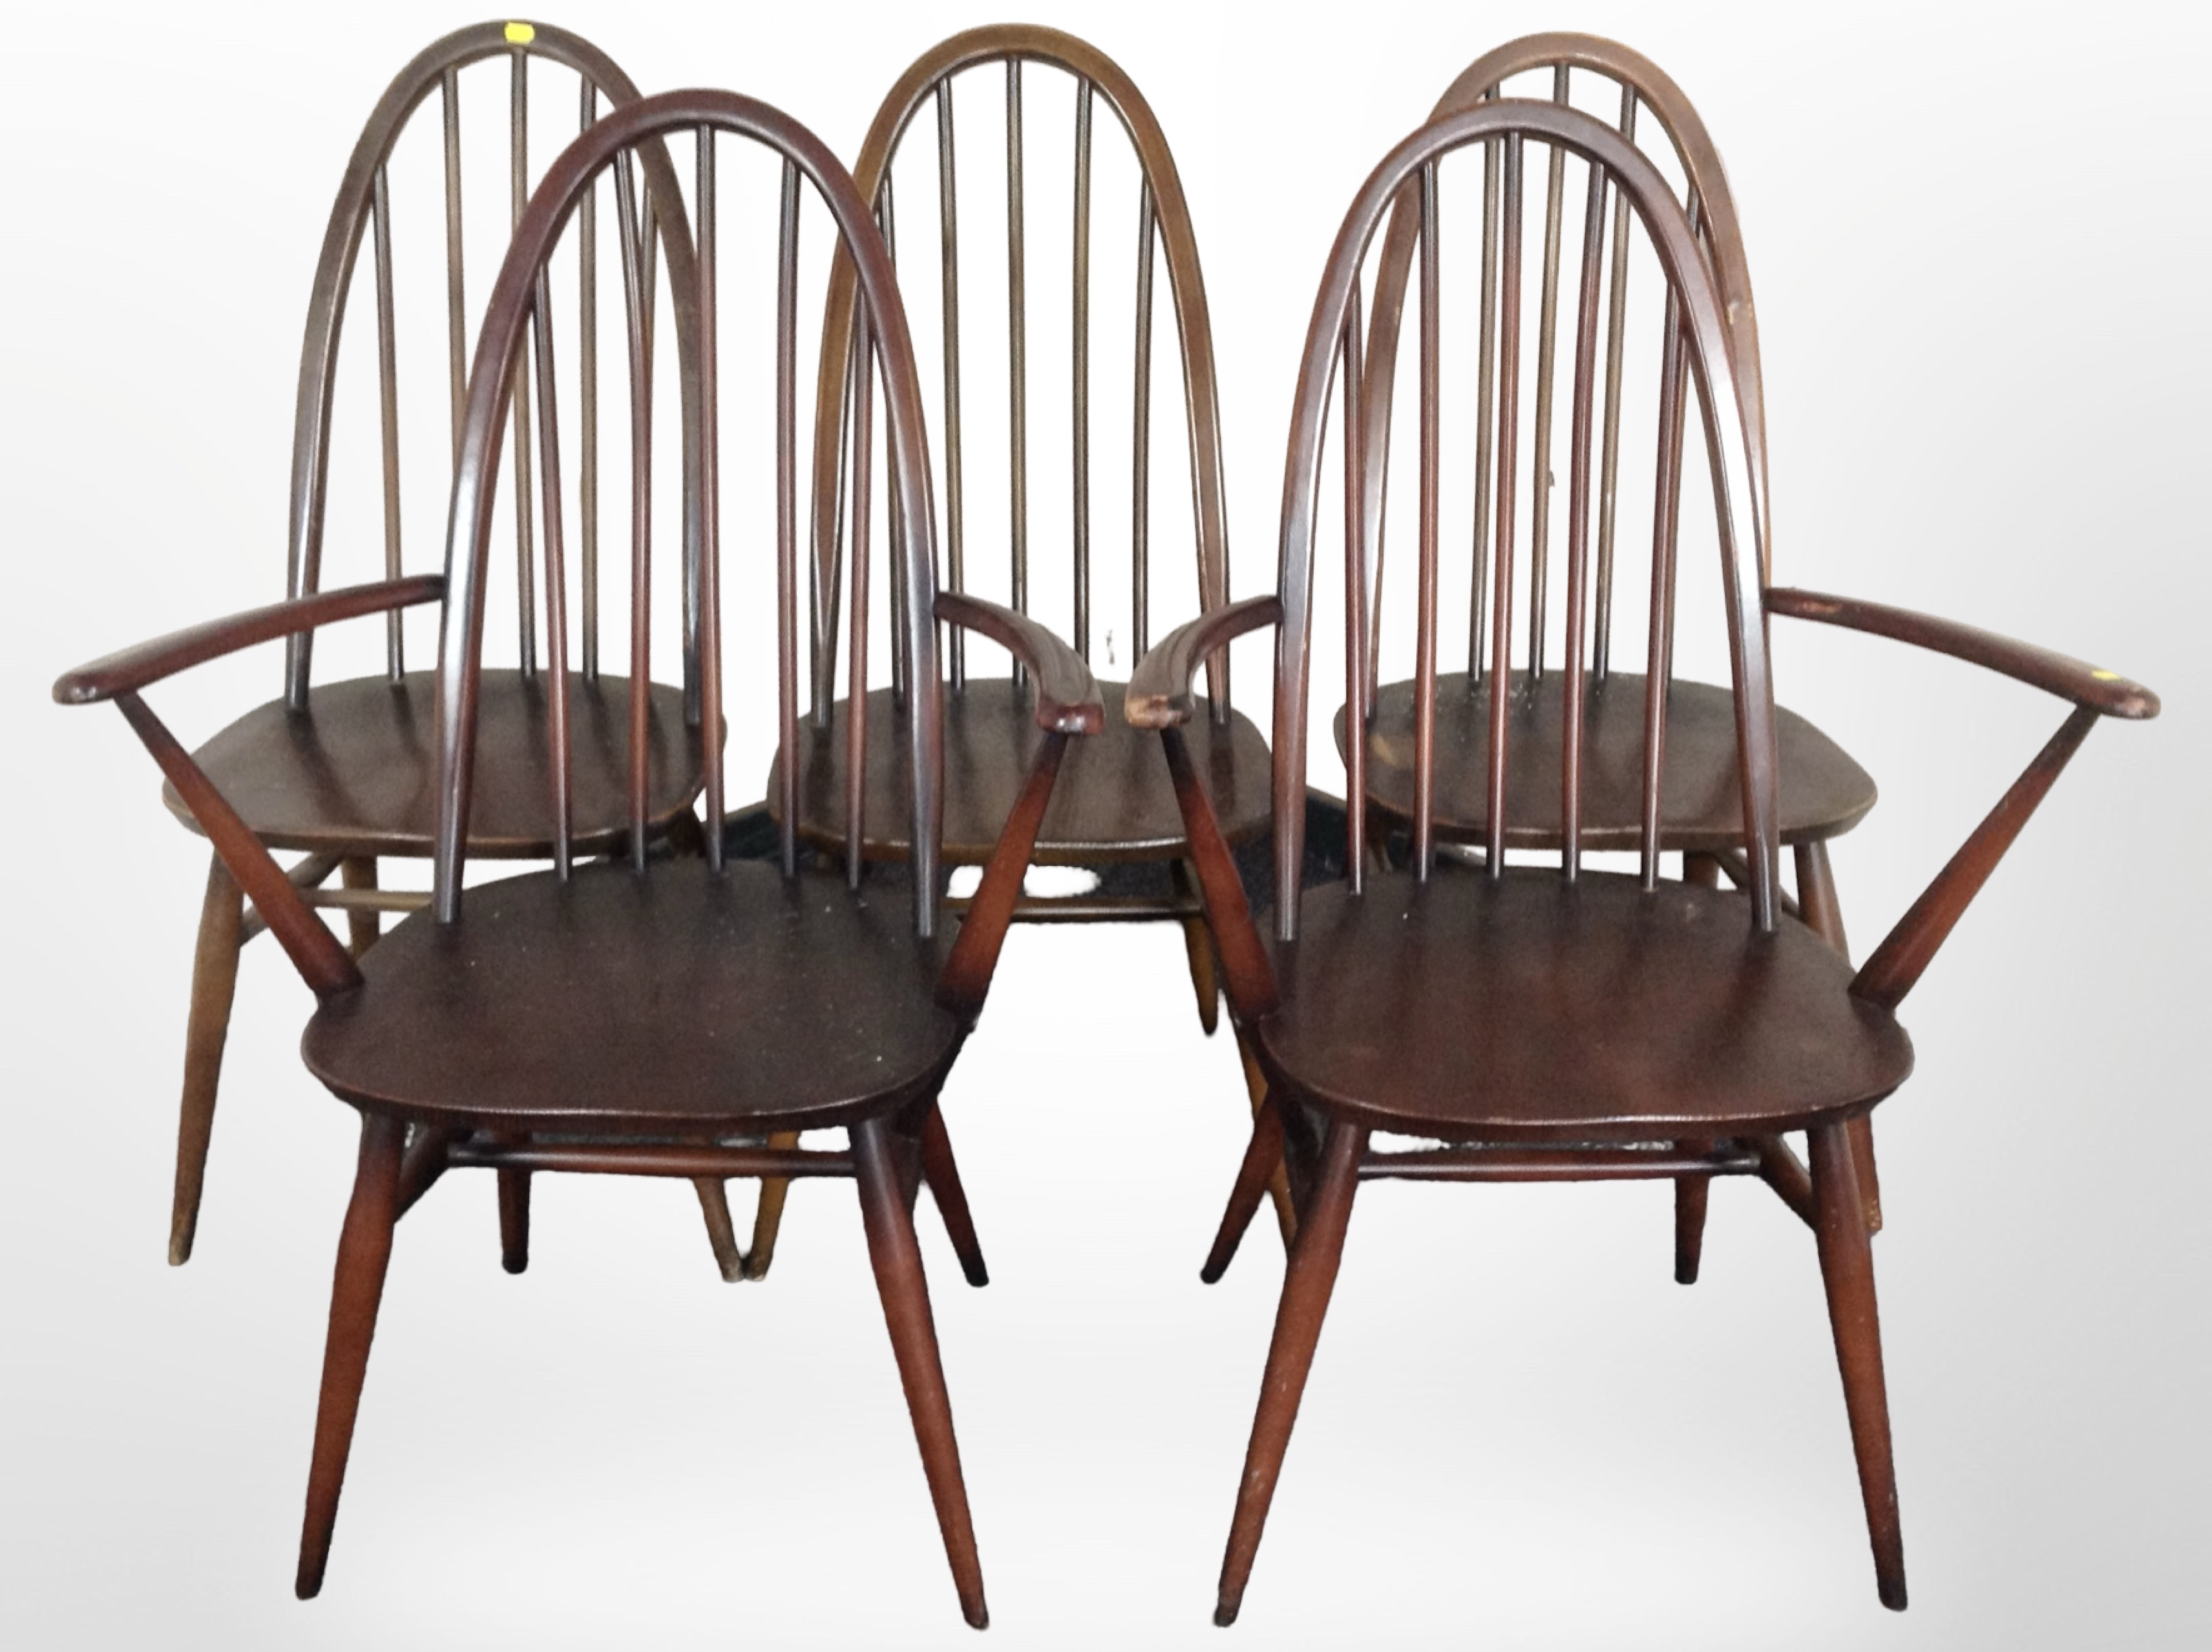 A pair of Ercol stained elm armchairs and three similar single chairs